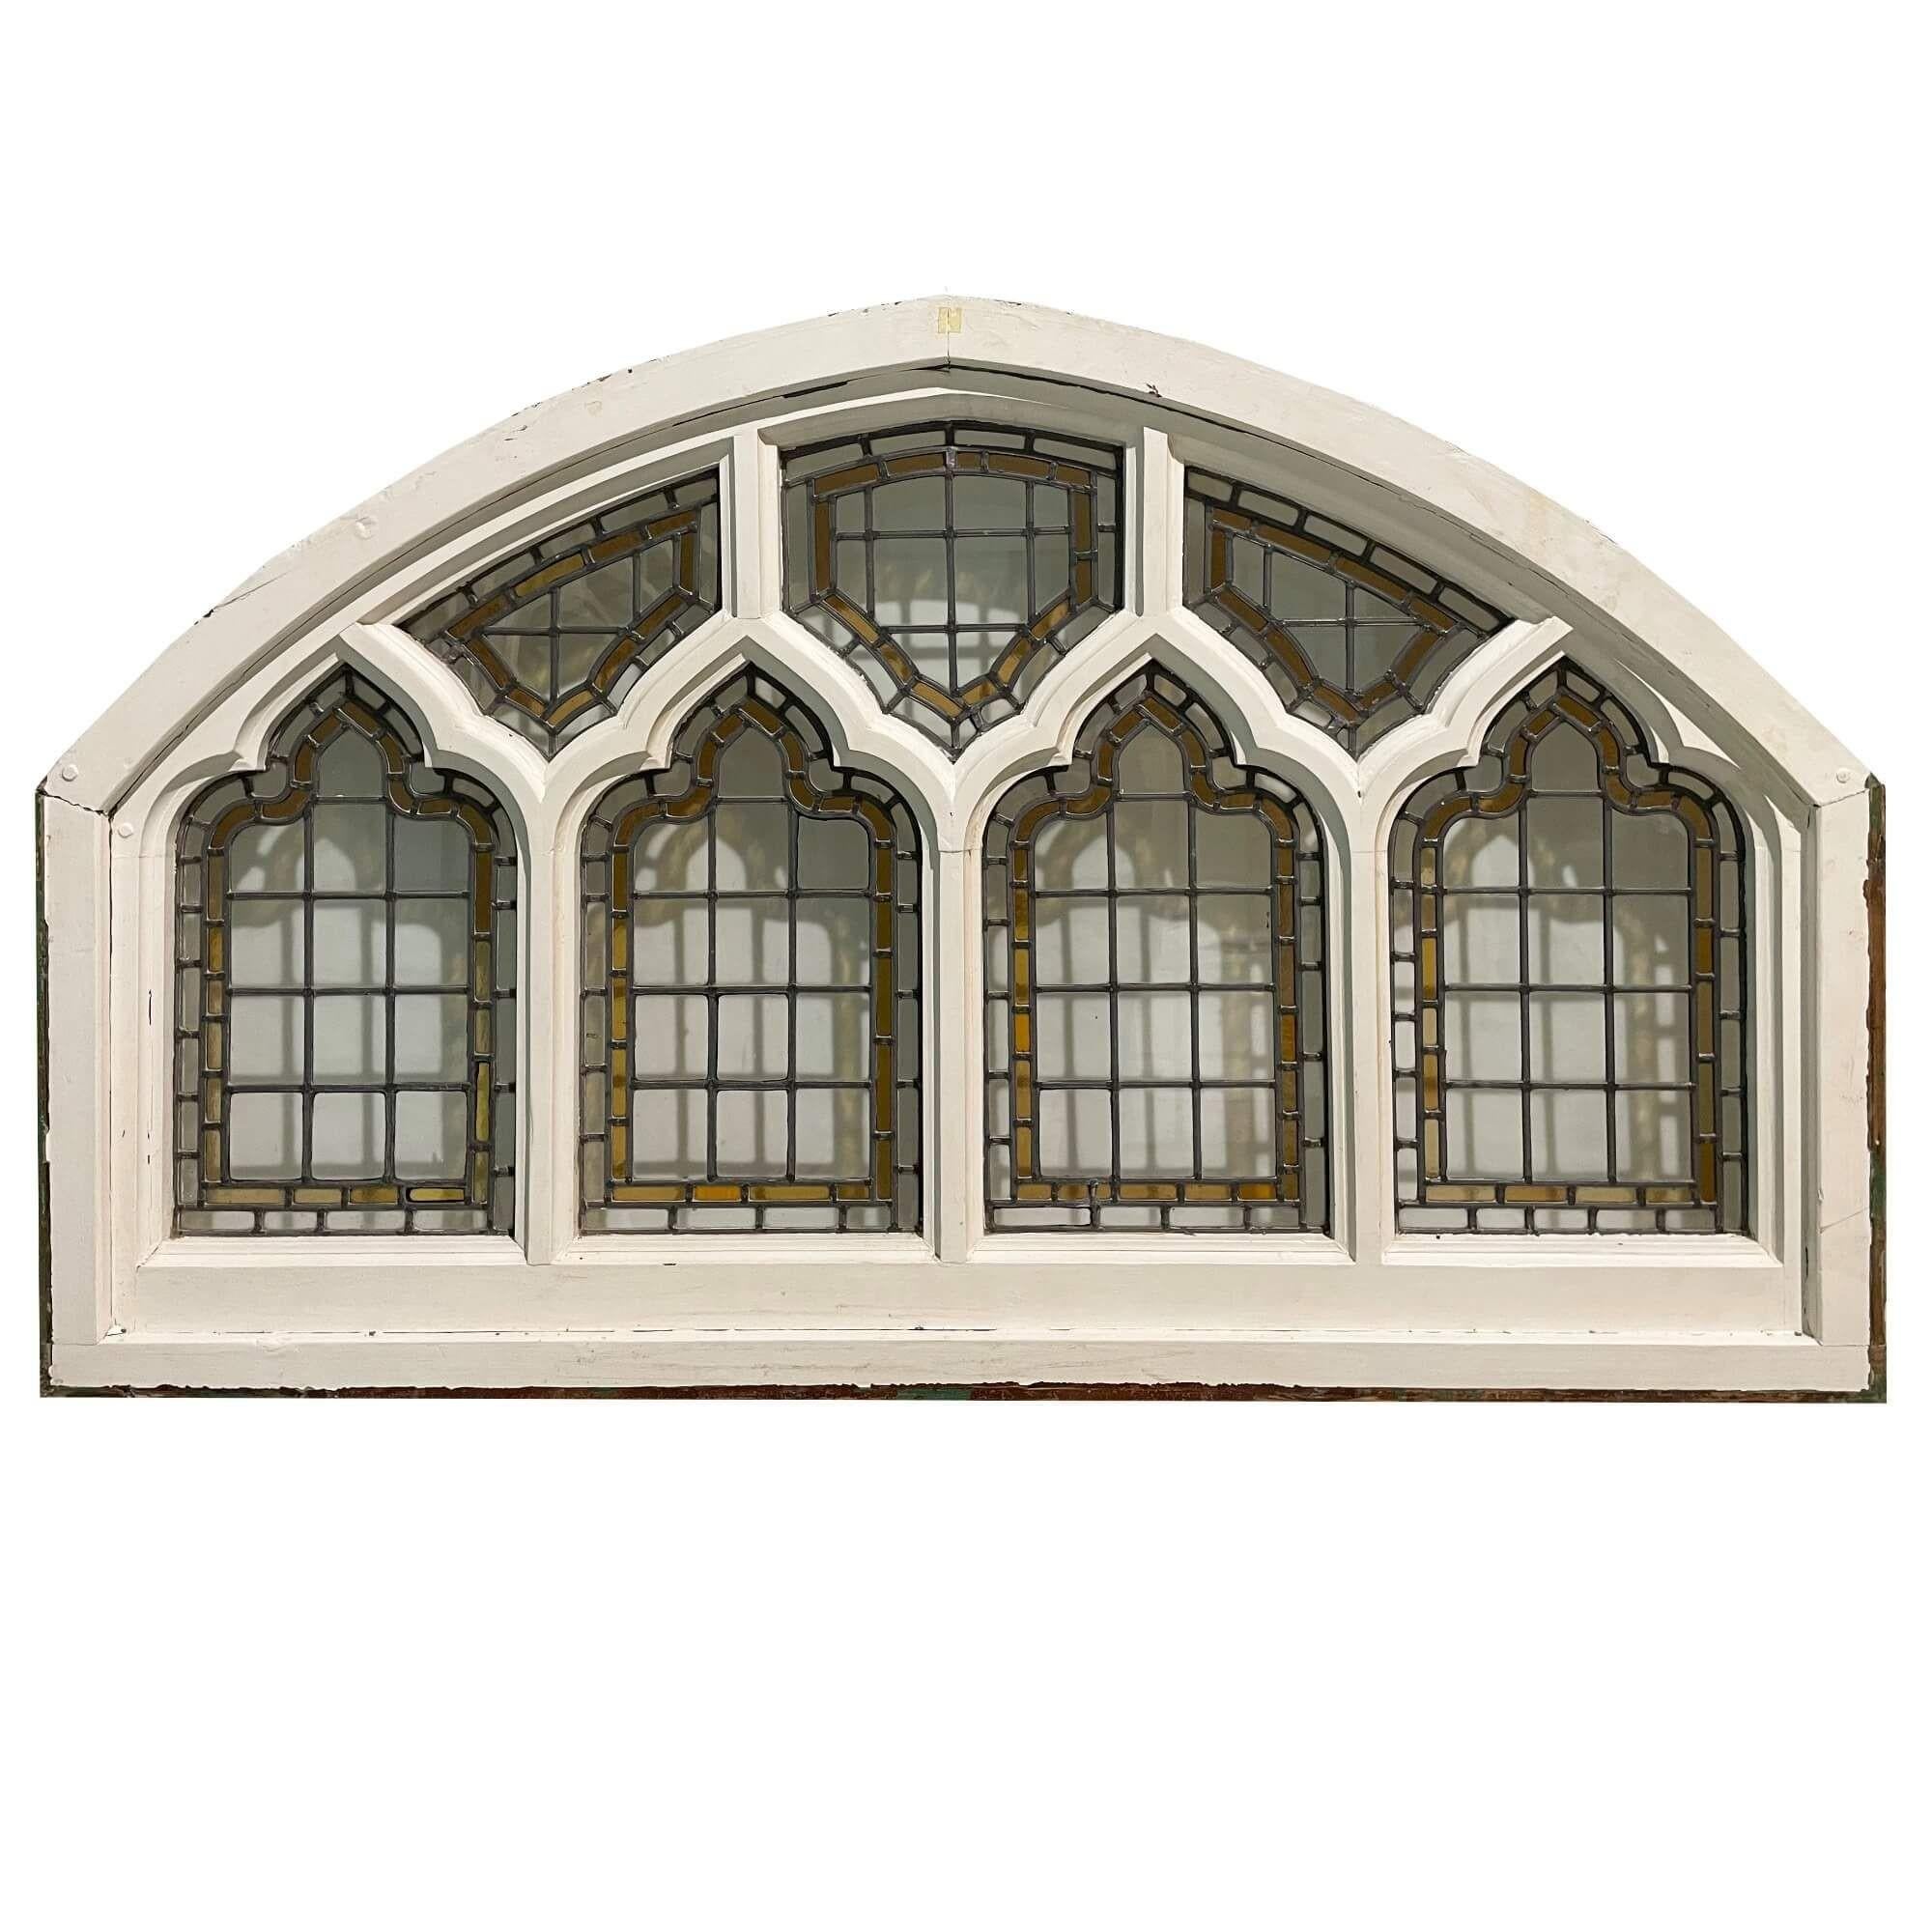 A leaded arched ecclesiastical style window dating from 1890. This arched masterpiece was sourced from a private house in Brighton, and previous to this it once took pride of place in a chapel. The window is made from softwood with a painted pine